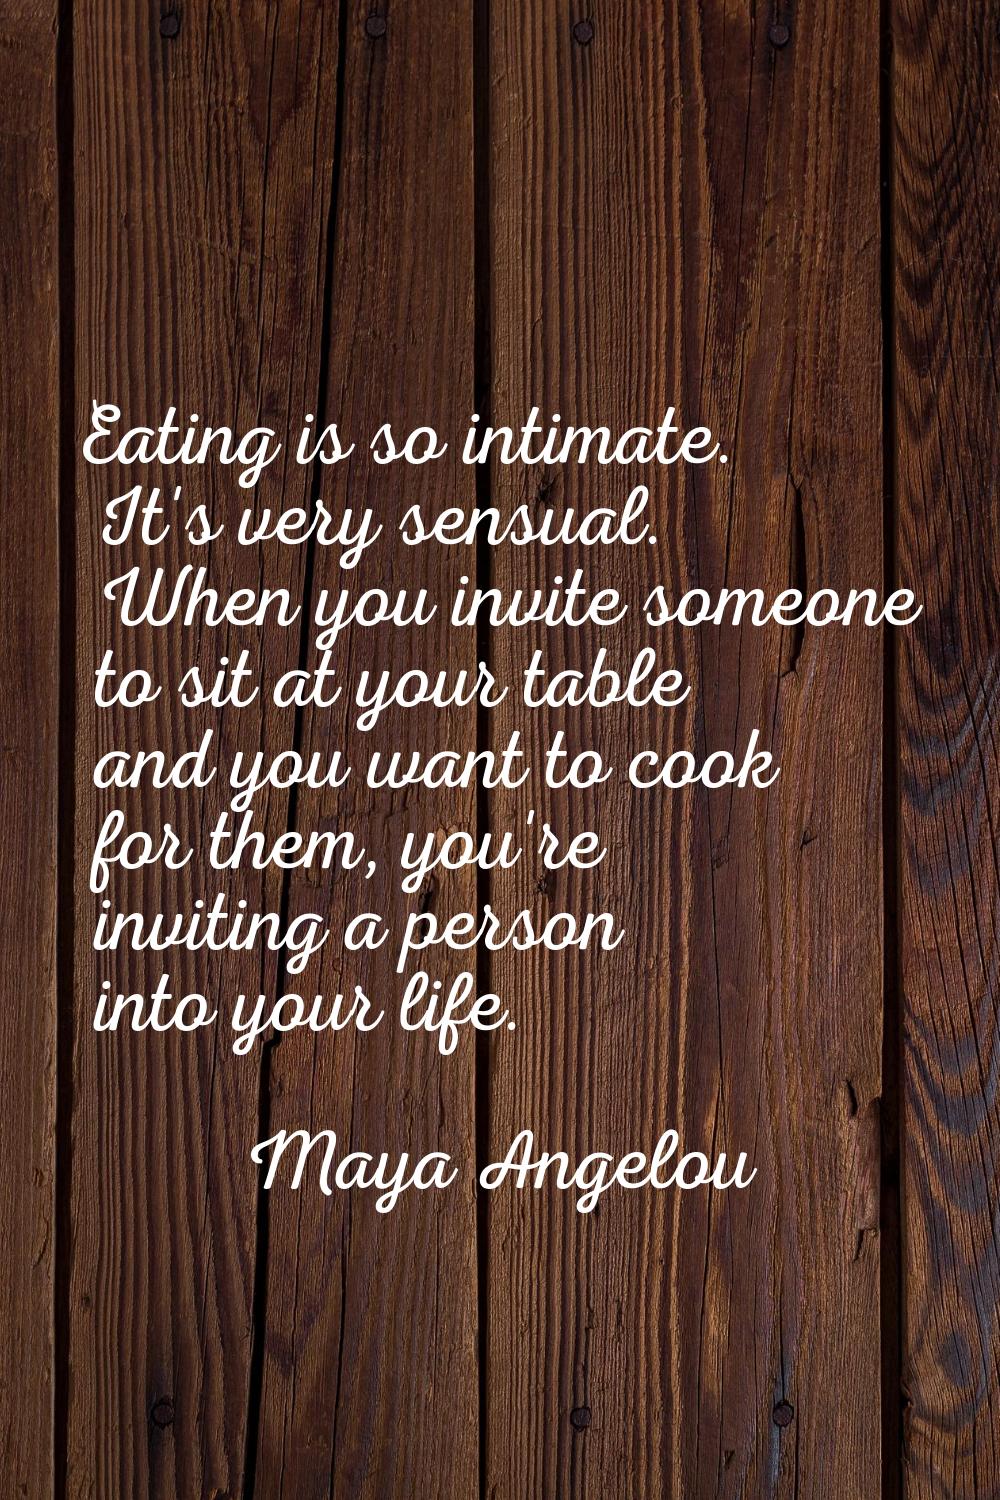 Eating is so intimate. It's very sensual. When you invite someone to sit at your table and you want